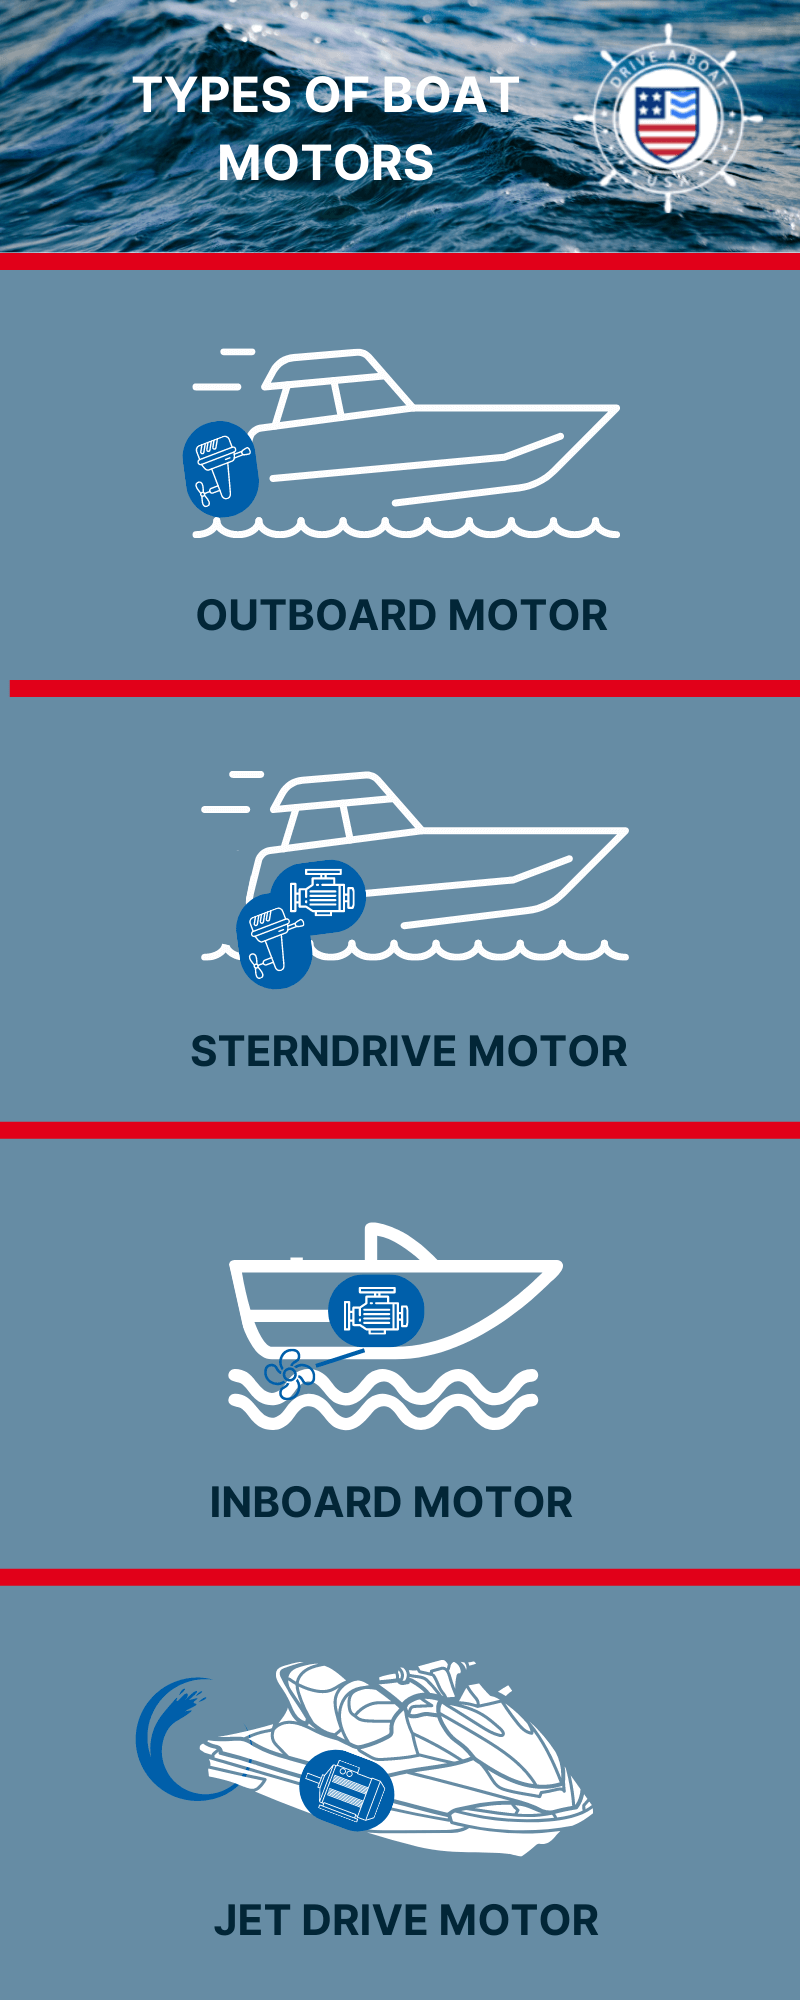 Types of Boat Motors Infographic